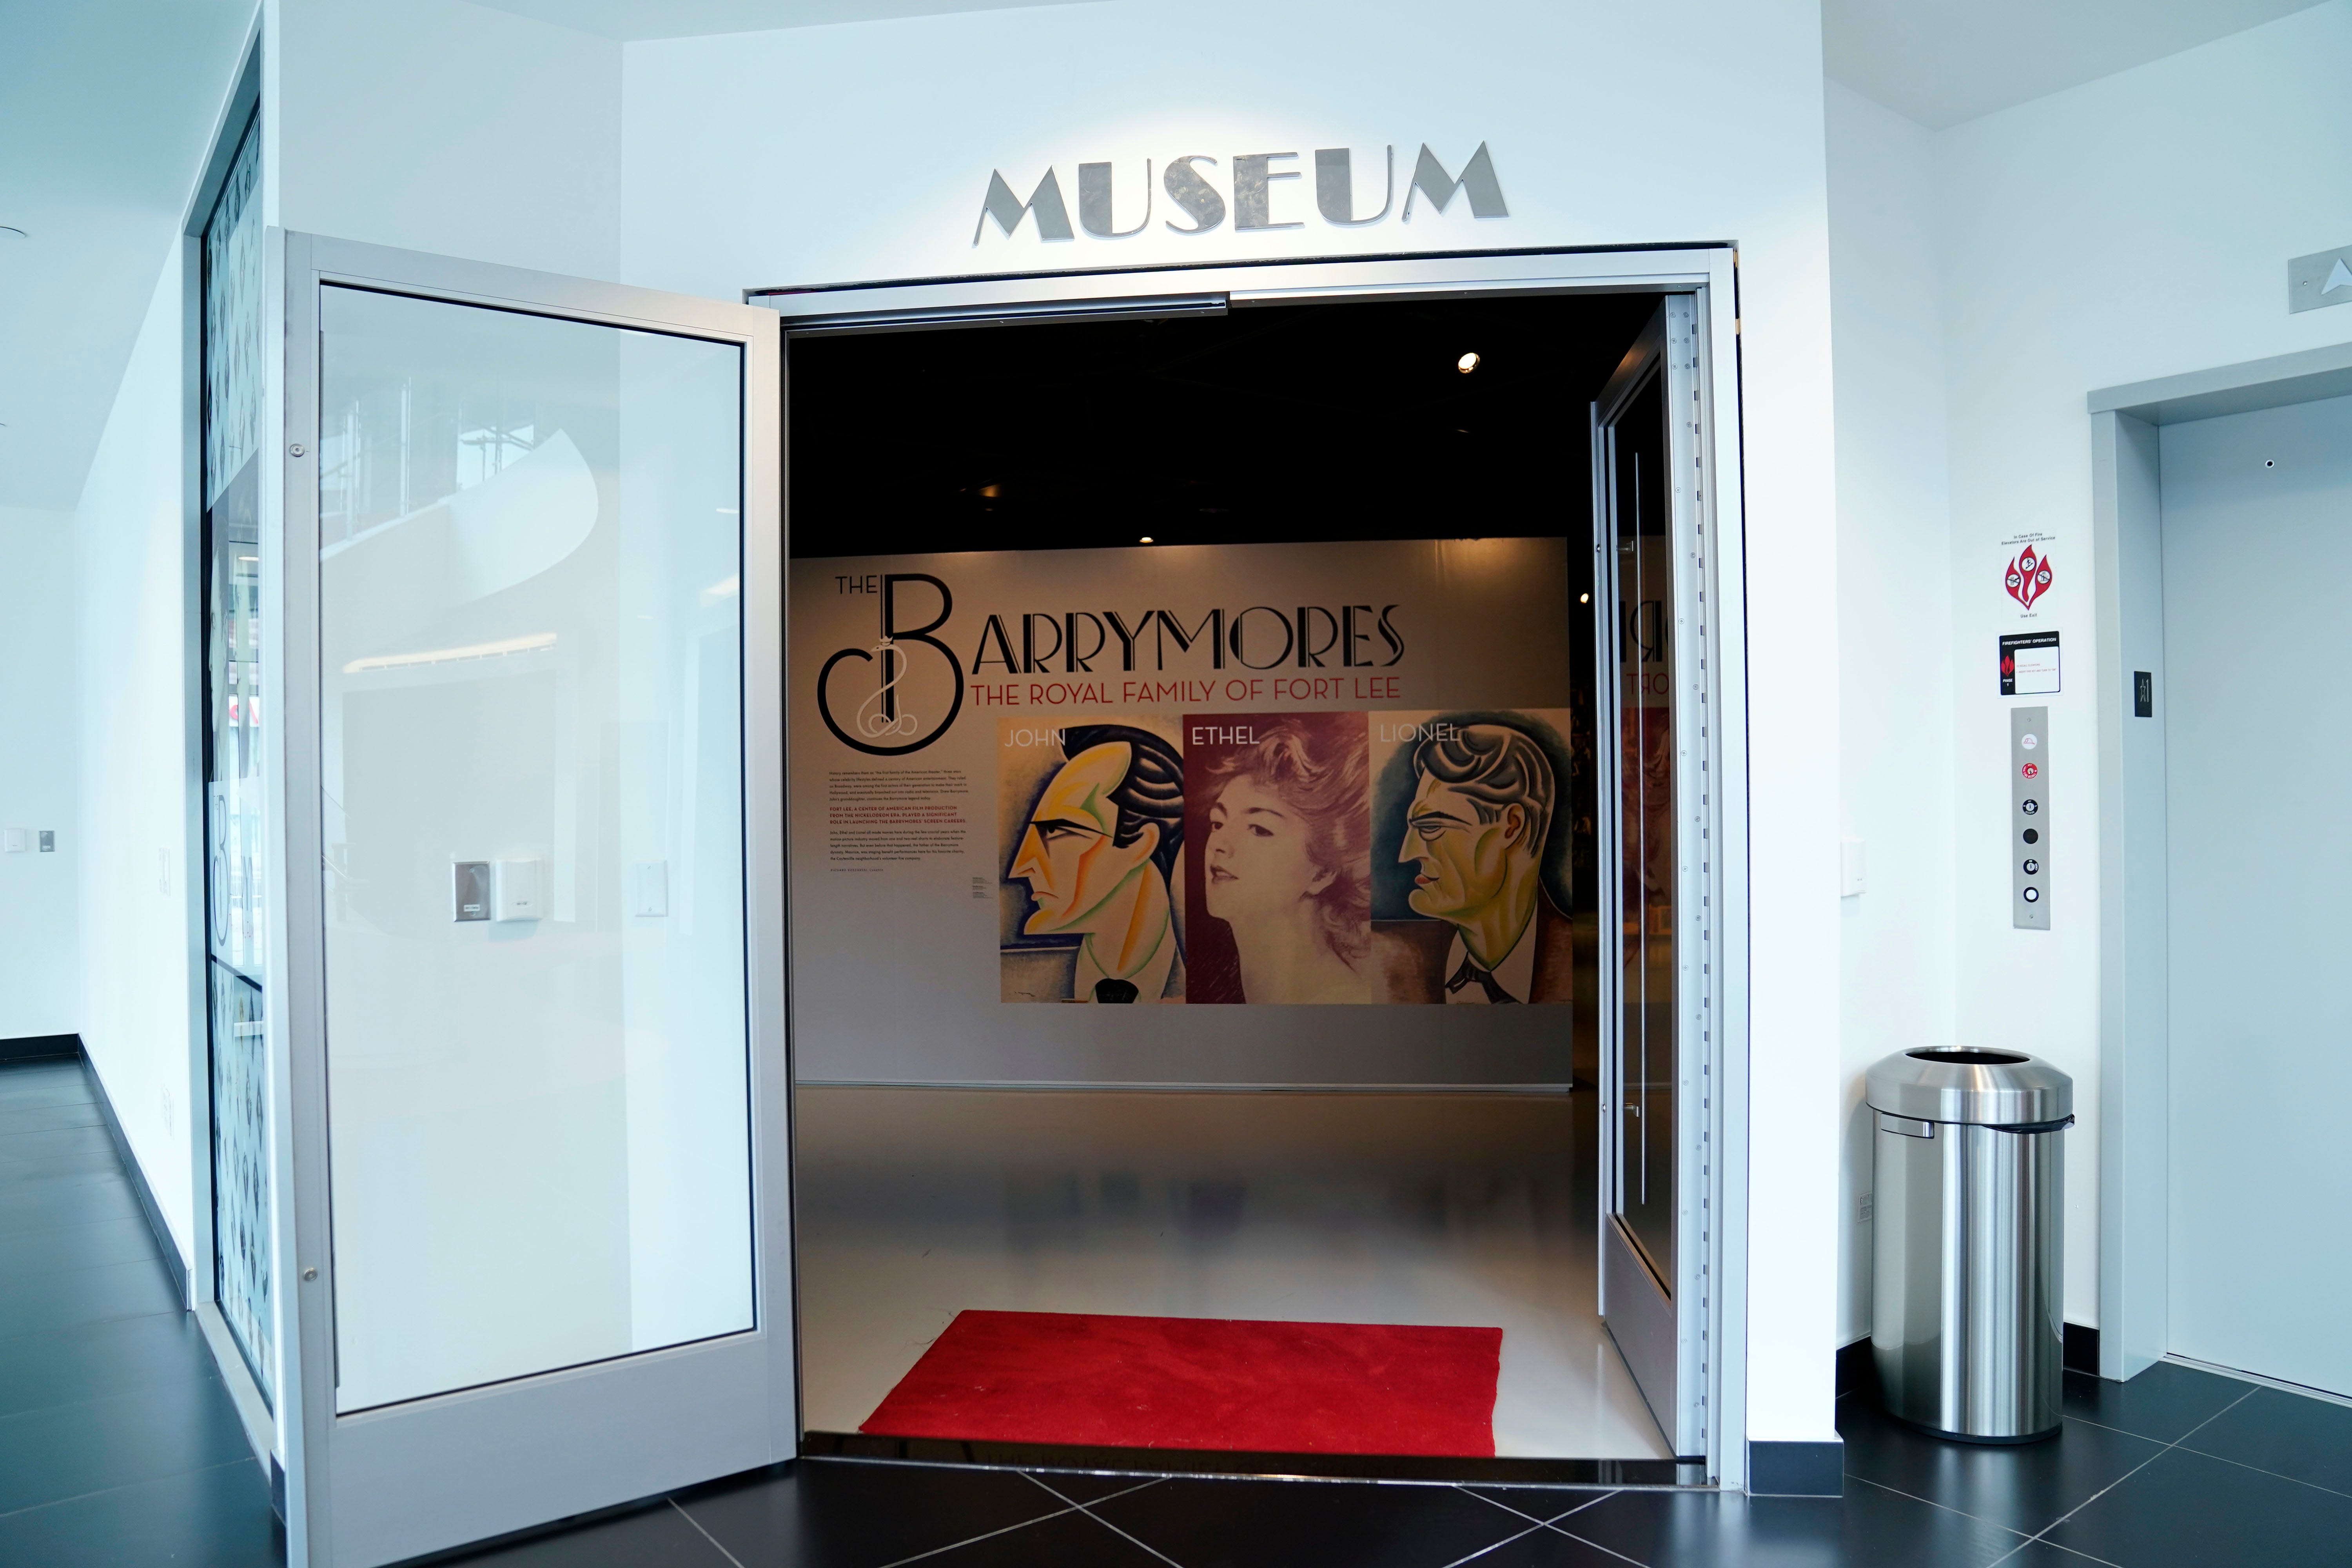 In Fort Lee, the Barrymore Film Center opens with a museum and theater